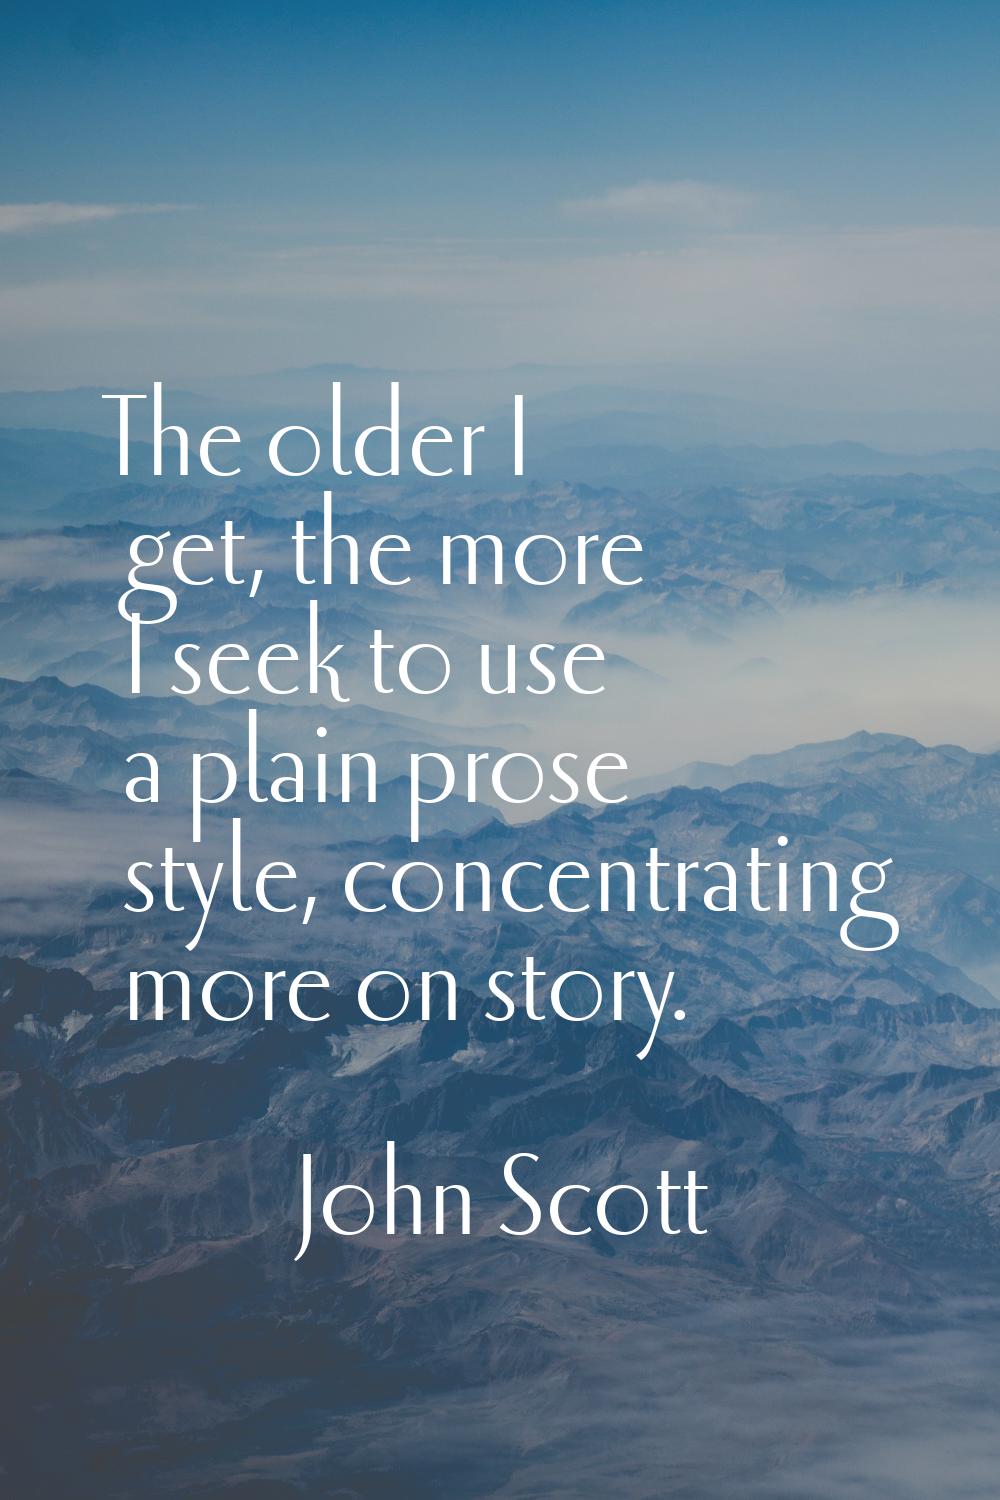 The older I get, the more I seek to use a plain prose style, concentrating more on story.